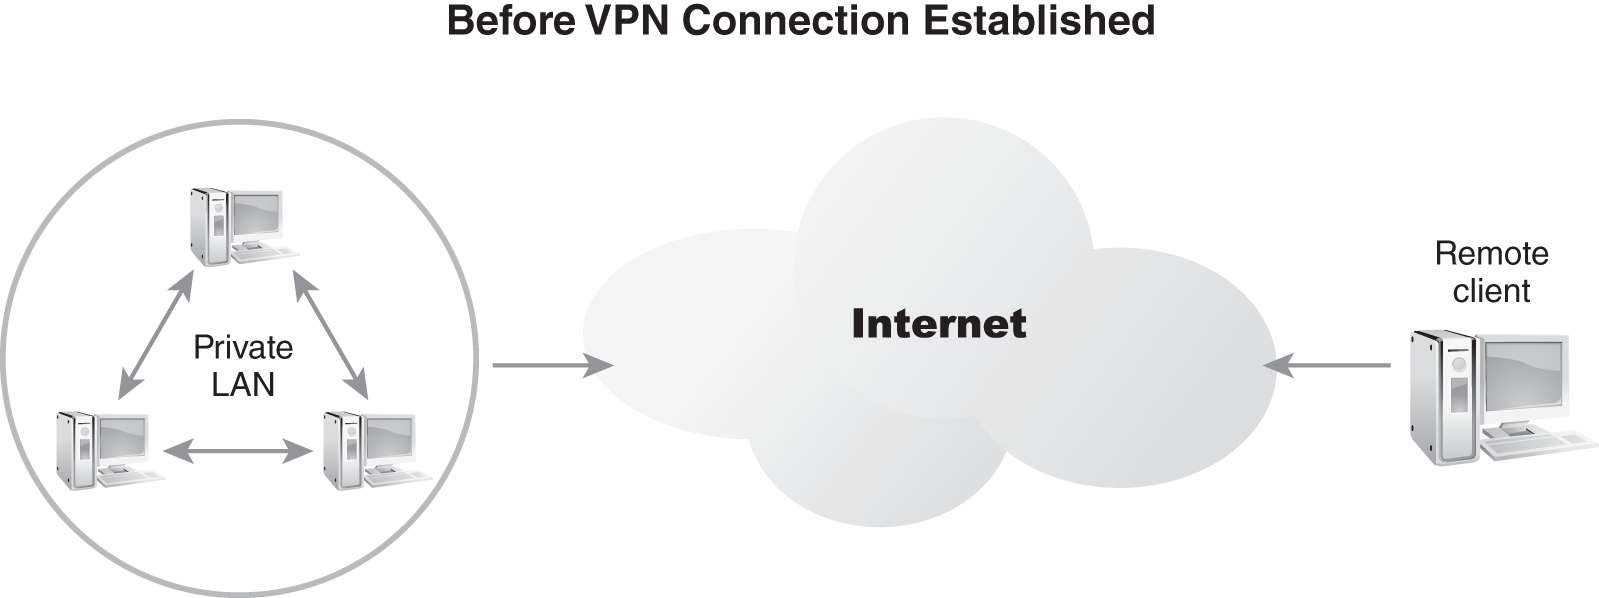 A diagram illustrates common resource access connections, before V P N connection established.